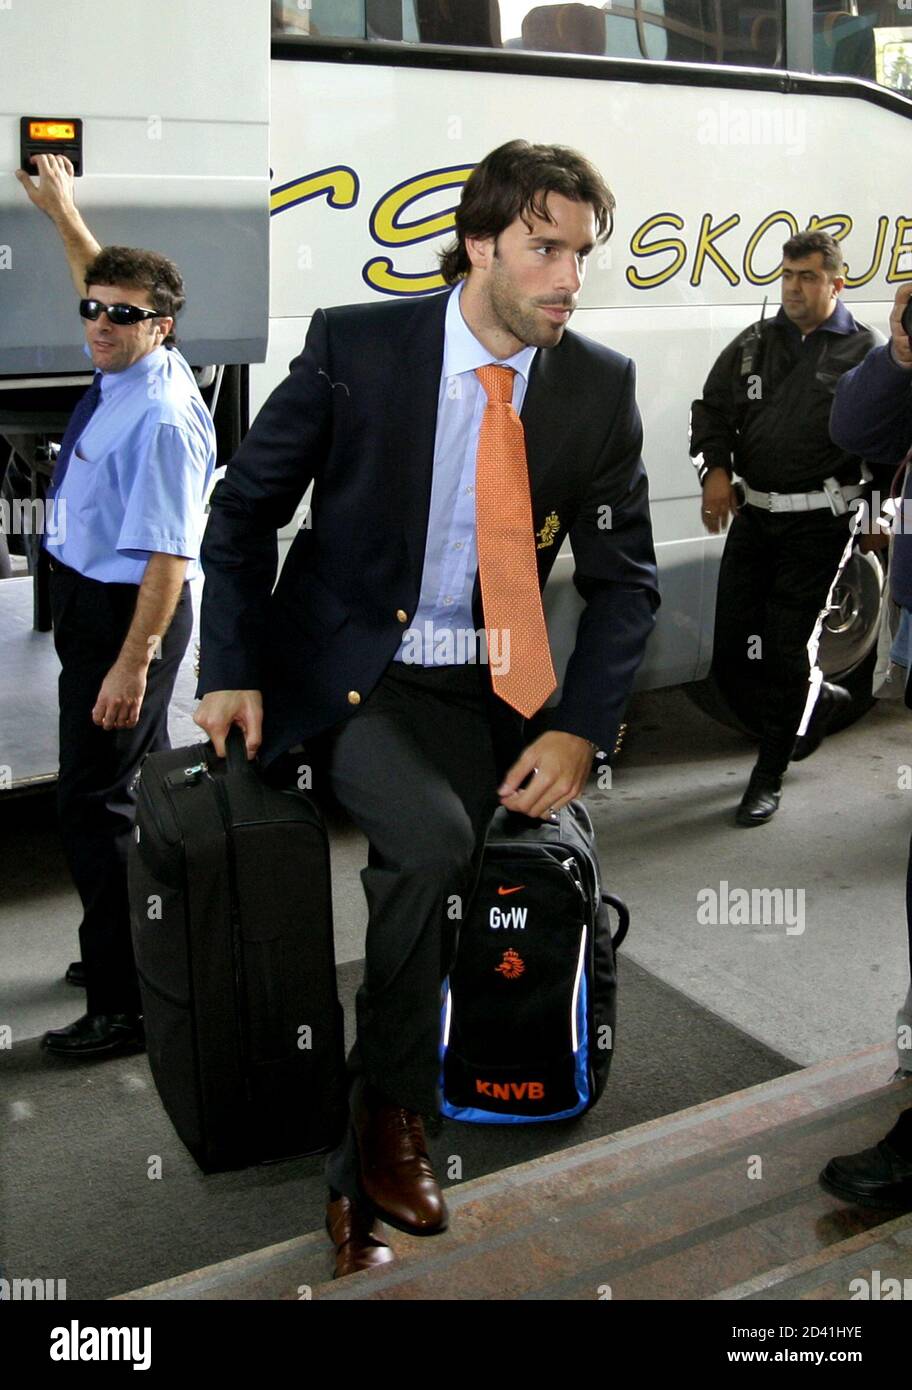 Dutch striker Ruud van Nistelrooy rushes past the press after his team's arrival at Macedonian capital Skopje, October 8, 2004. Macedonia will meet Netherlands on October 9 in their World Cup European zone Group one qualifying match. REUTERS/Oleg Popov  OP Stock Photo